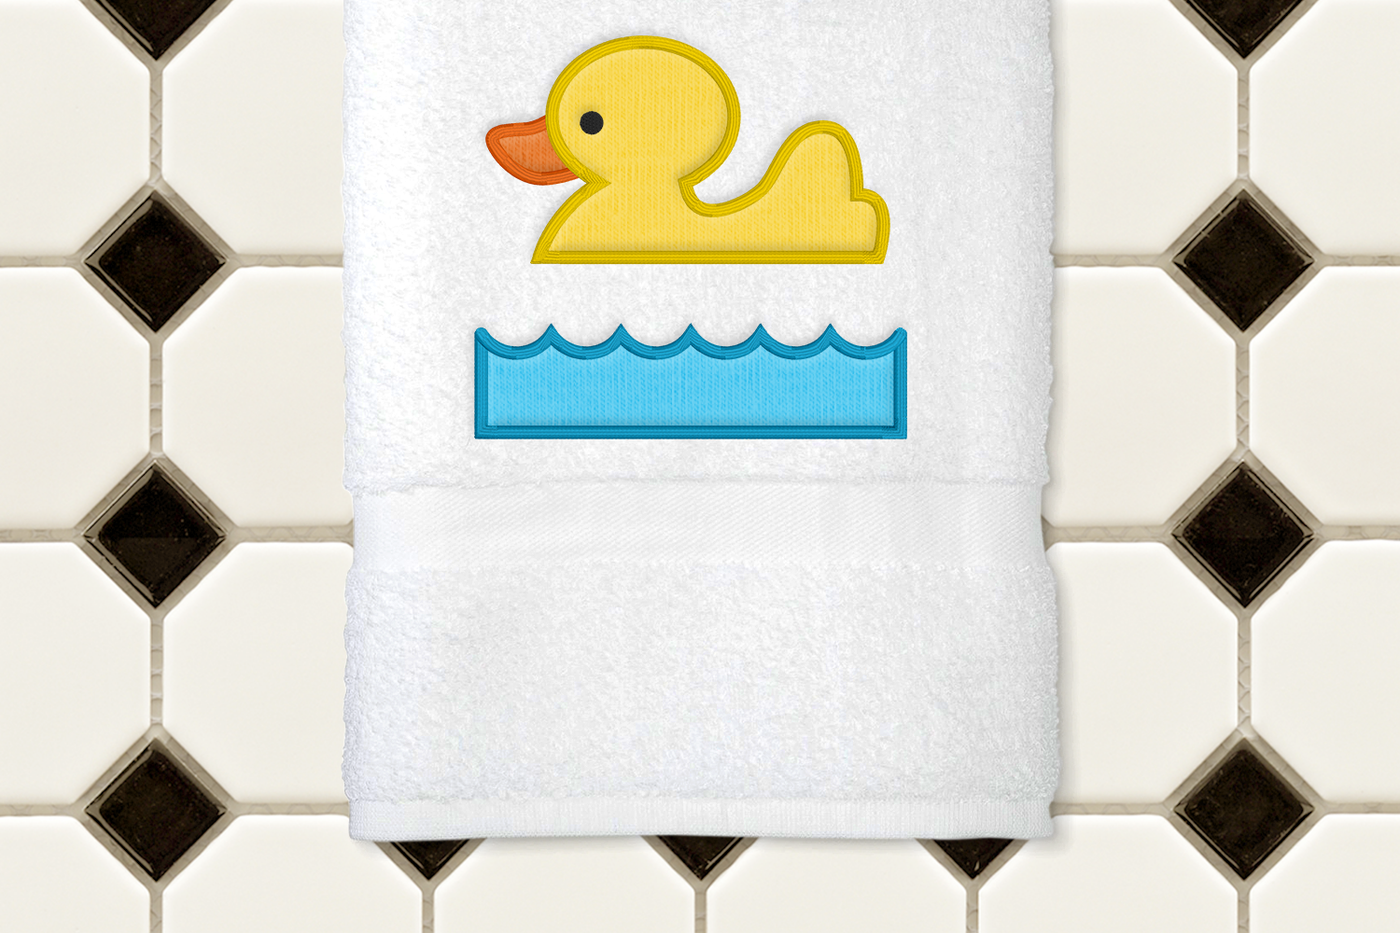 Rubber duck applique embroidery design with split and water